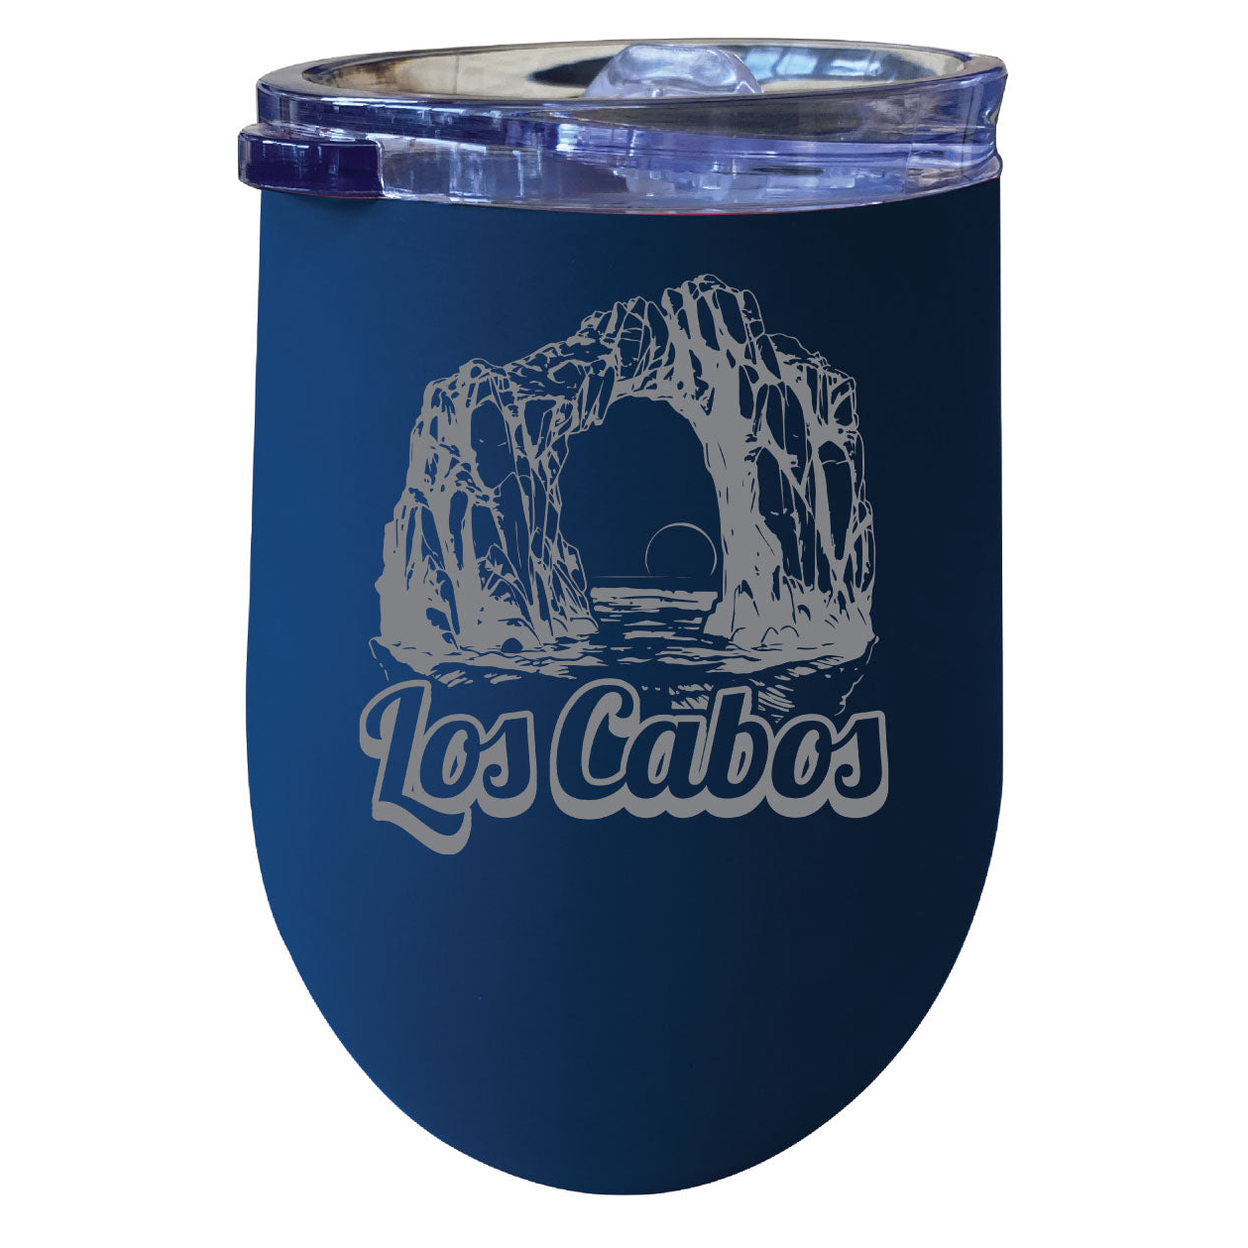 Los Cabos Mexico Souvenir 12 Oz Engraved Insulated Wine Stainless Steel Tumbler - Navy,,4-Pack